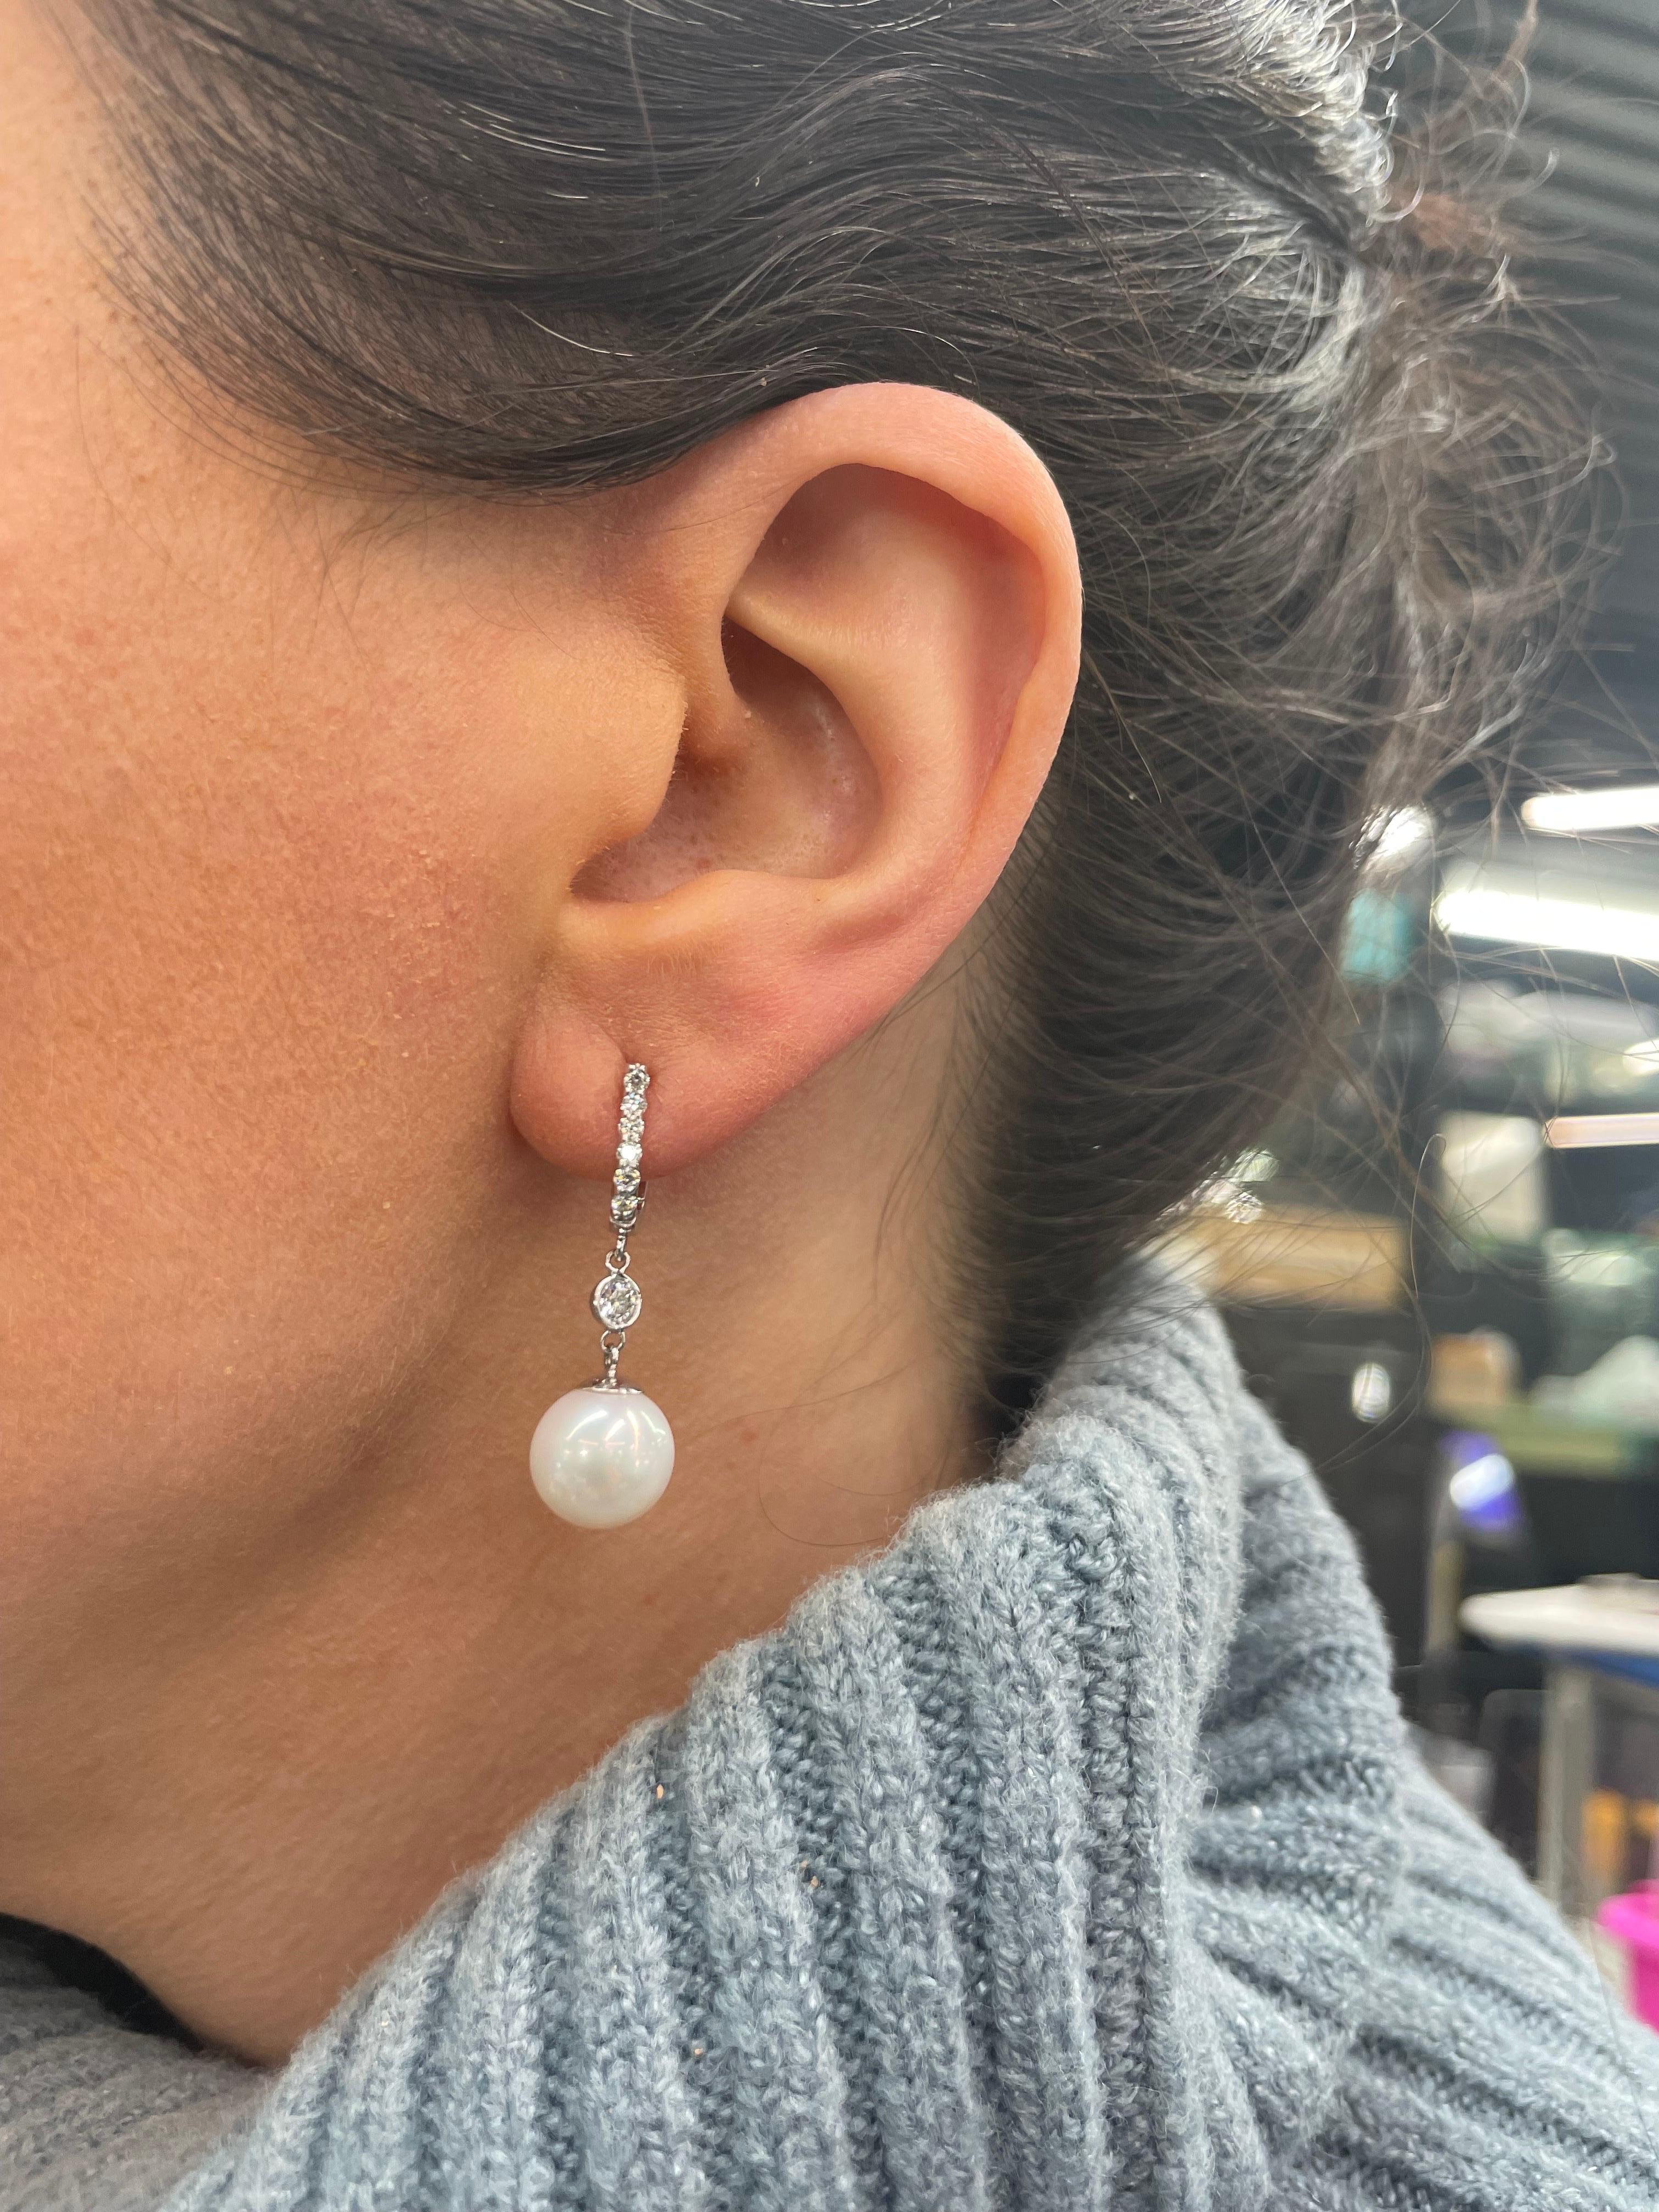 14 Karat White Gold drop earrings featuring two Freshwater pearls measuring 10-10.5 mm with 14 round brilliants in the diamond hoop weighing 0.48 carats and two round brilliants weighing 0.22 carats.

Can customize in pearl color and gold color. 